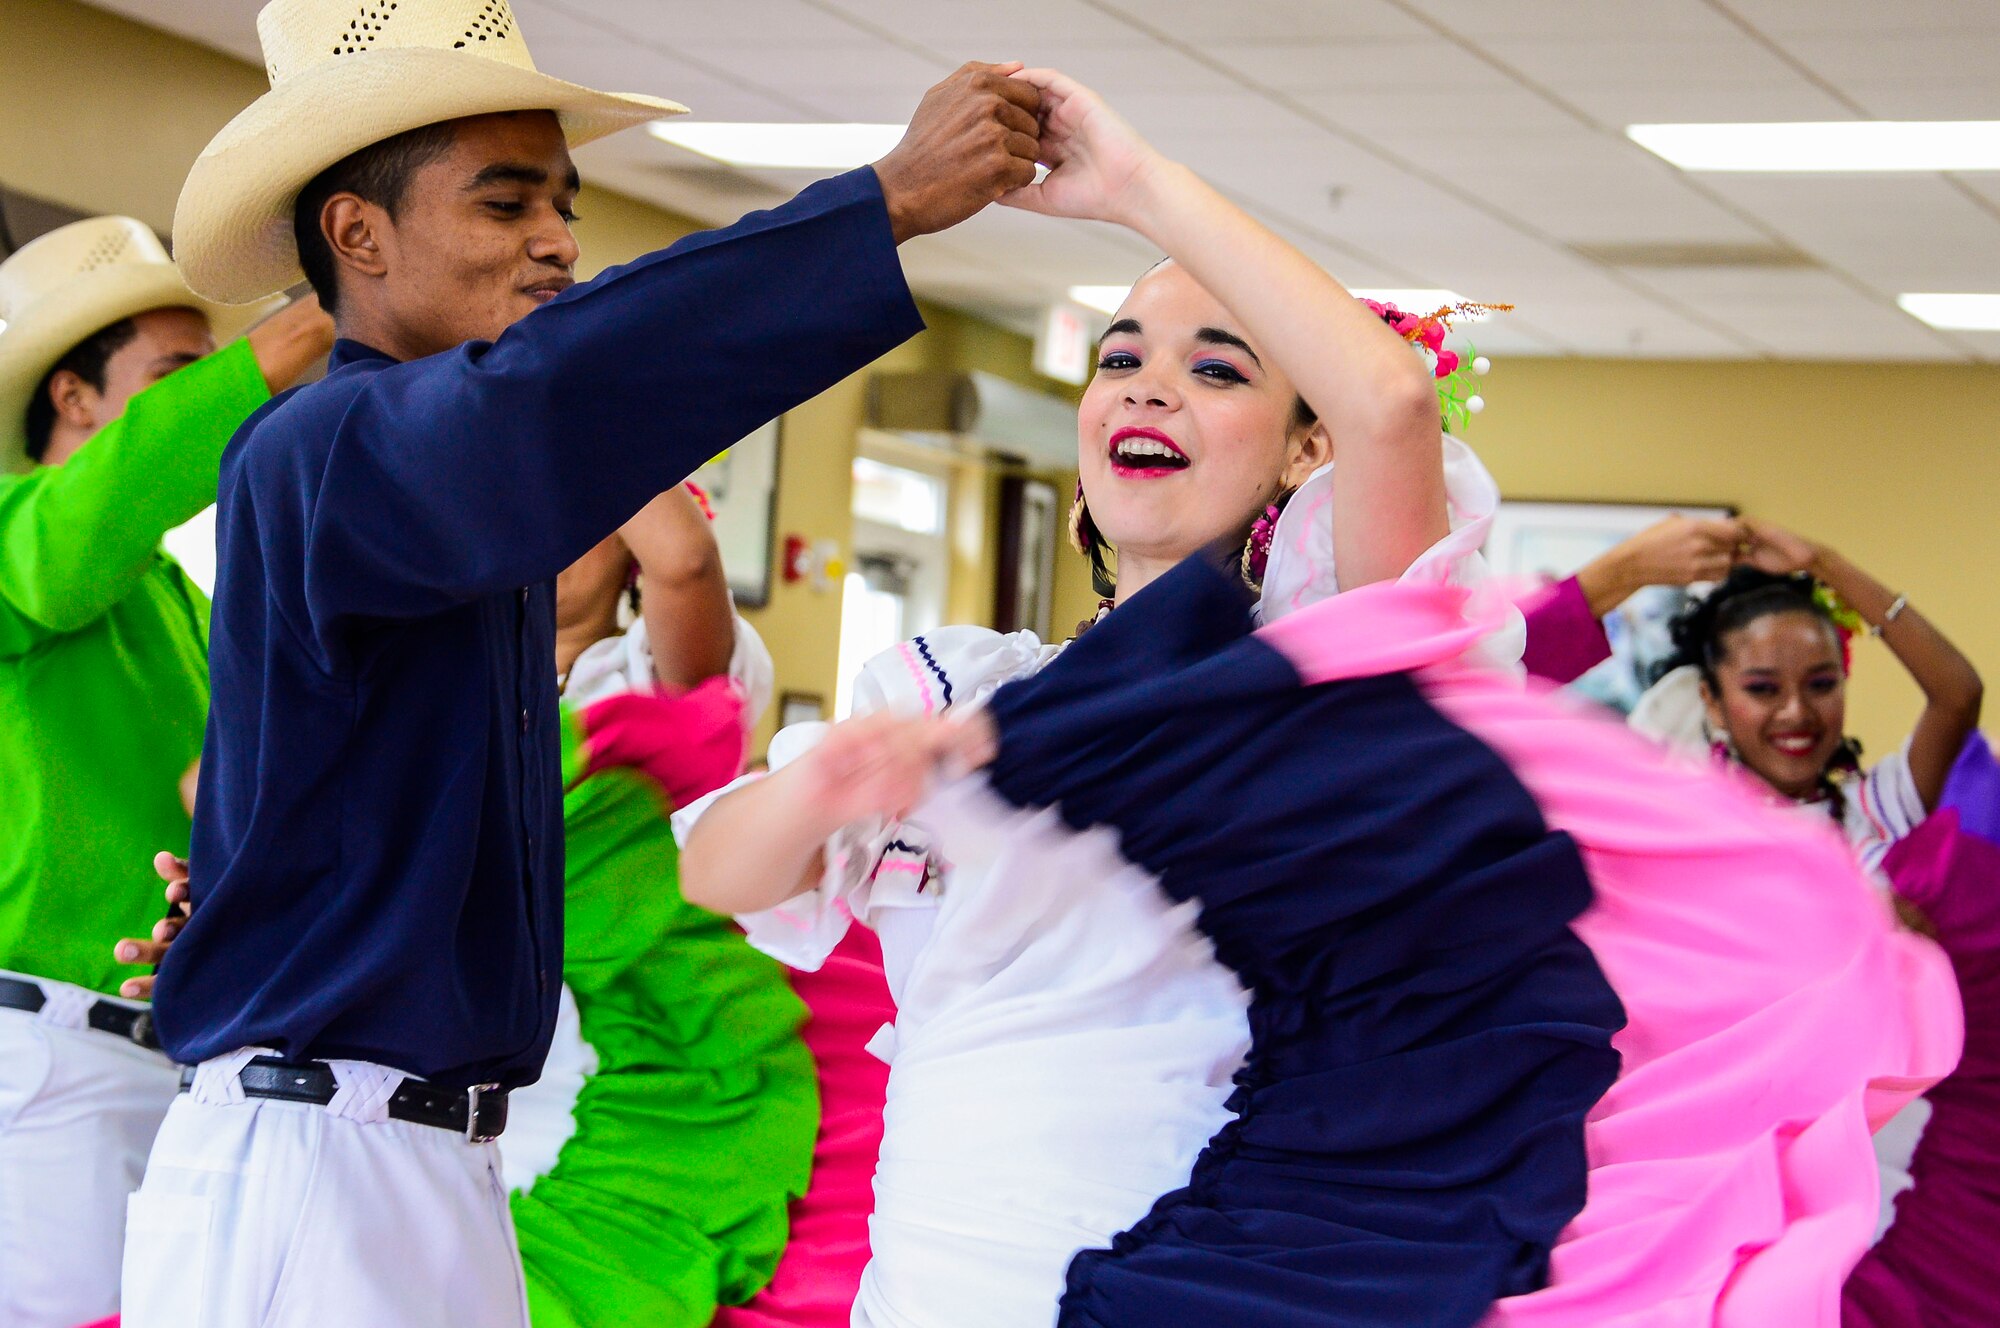 Folk dance performers from the Escuela Normal Centro América entertain the members of Joint Task Force-Bravo during Hispanic Heritage Month celebration at the dining facility on Soto Cano Air Base, Honduras, Oct. 9, 2014.  In celebration of Hispanic Heritage Month, JTF-B coordinated performances from the Honduran Navy Band stationed in Tegucigalpa,  the official folk dance group from the Escuela Normal Centro América, as well as a couple of performers  from the Dilcia Mejia Dance School. (U.S. Air Force Photo by Tech. Sgt. Heather Redman/Released)